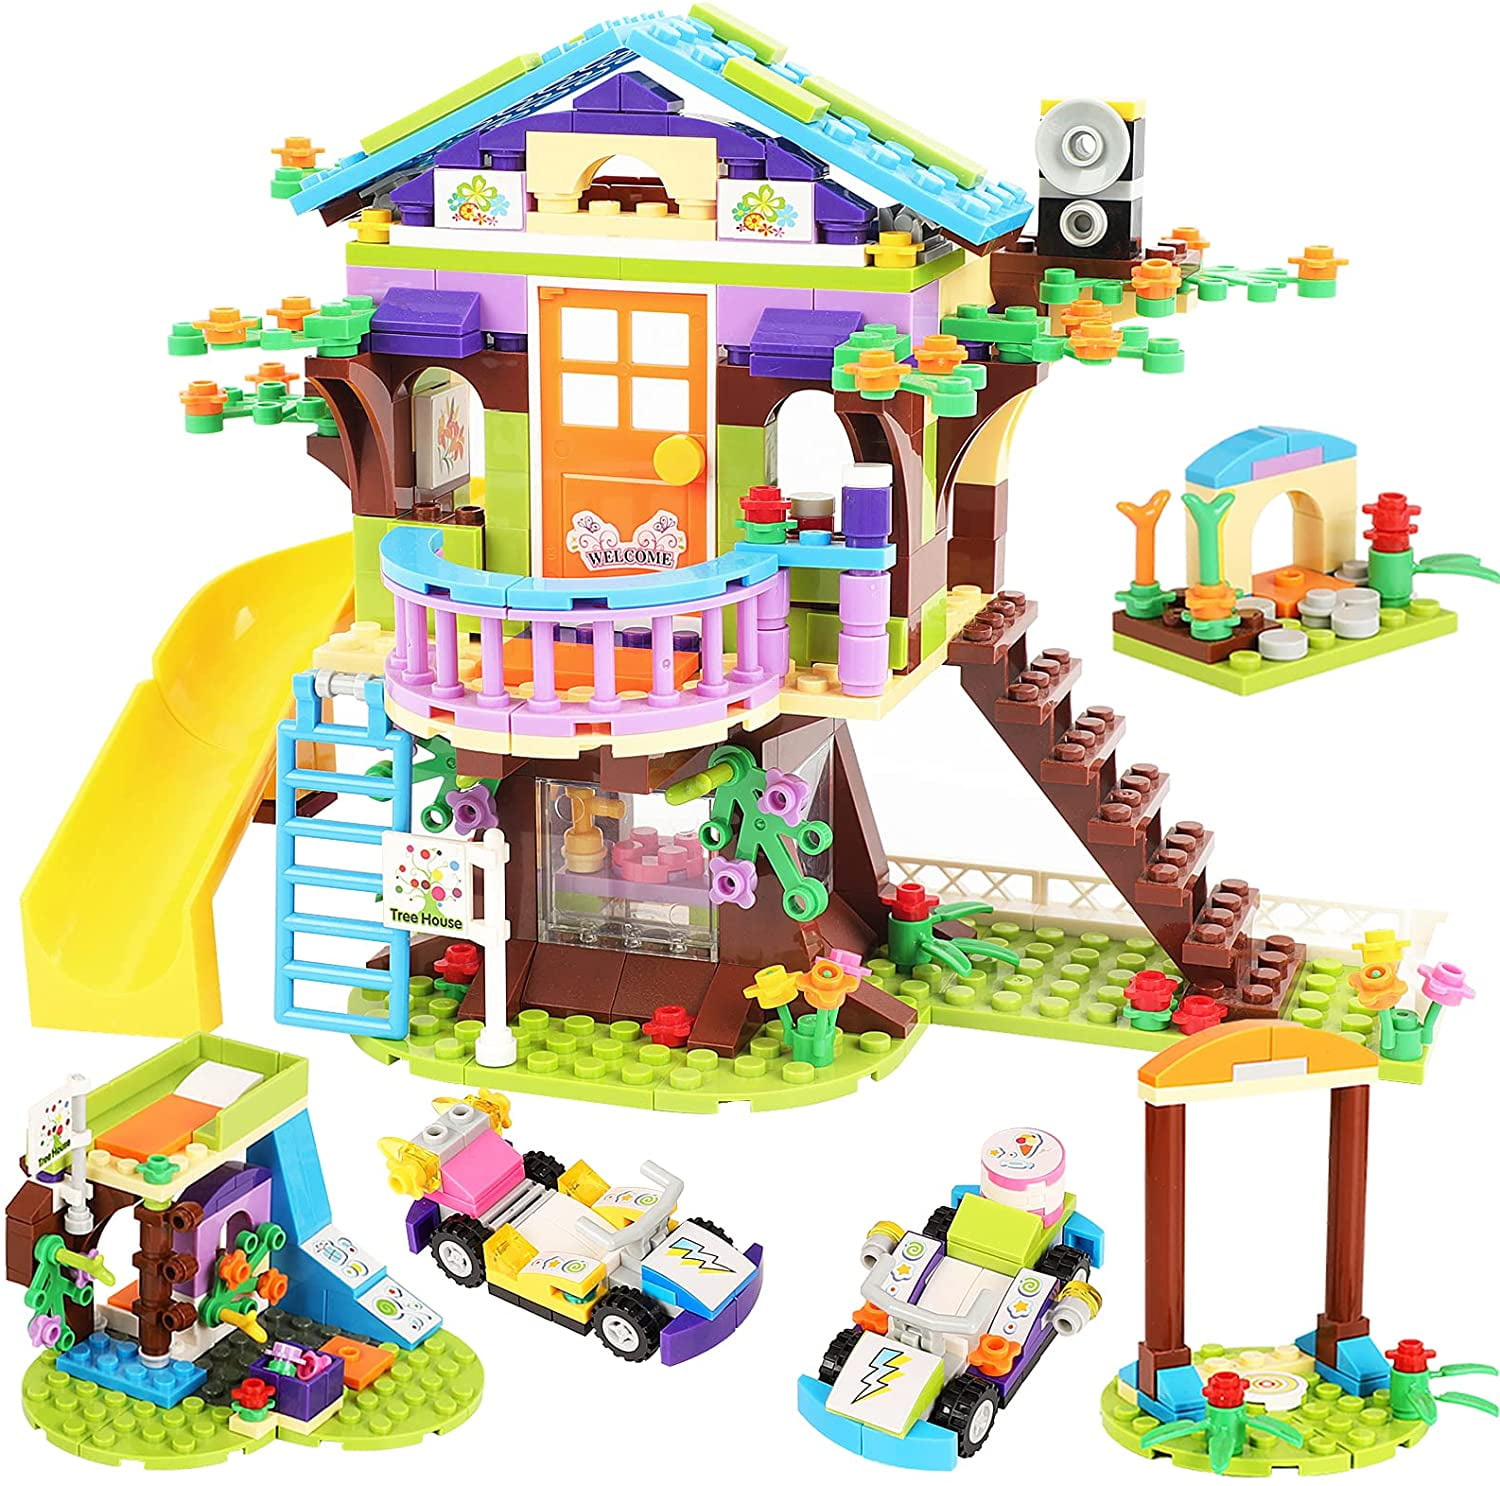 Details about   American Drama The World Room Upside Down Building Blocks Tree House Set Bricks 